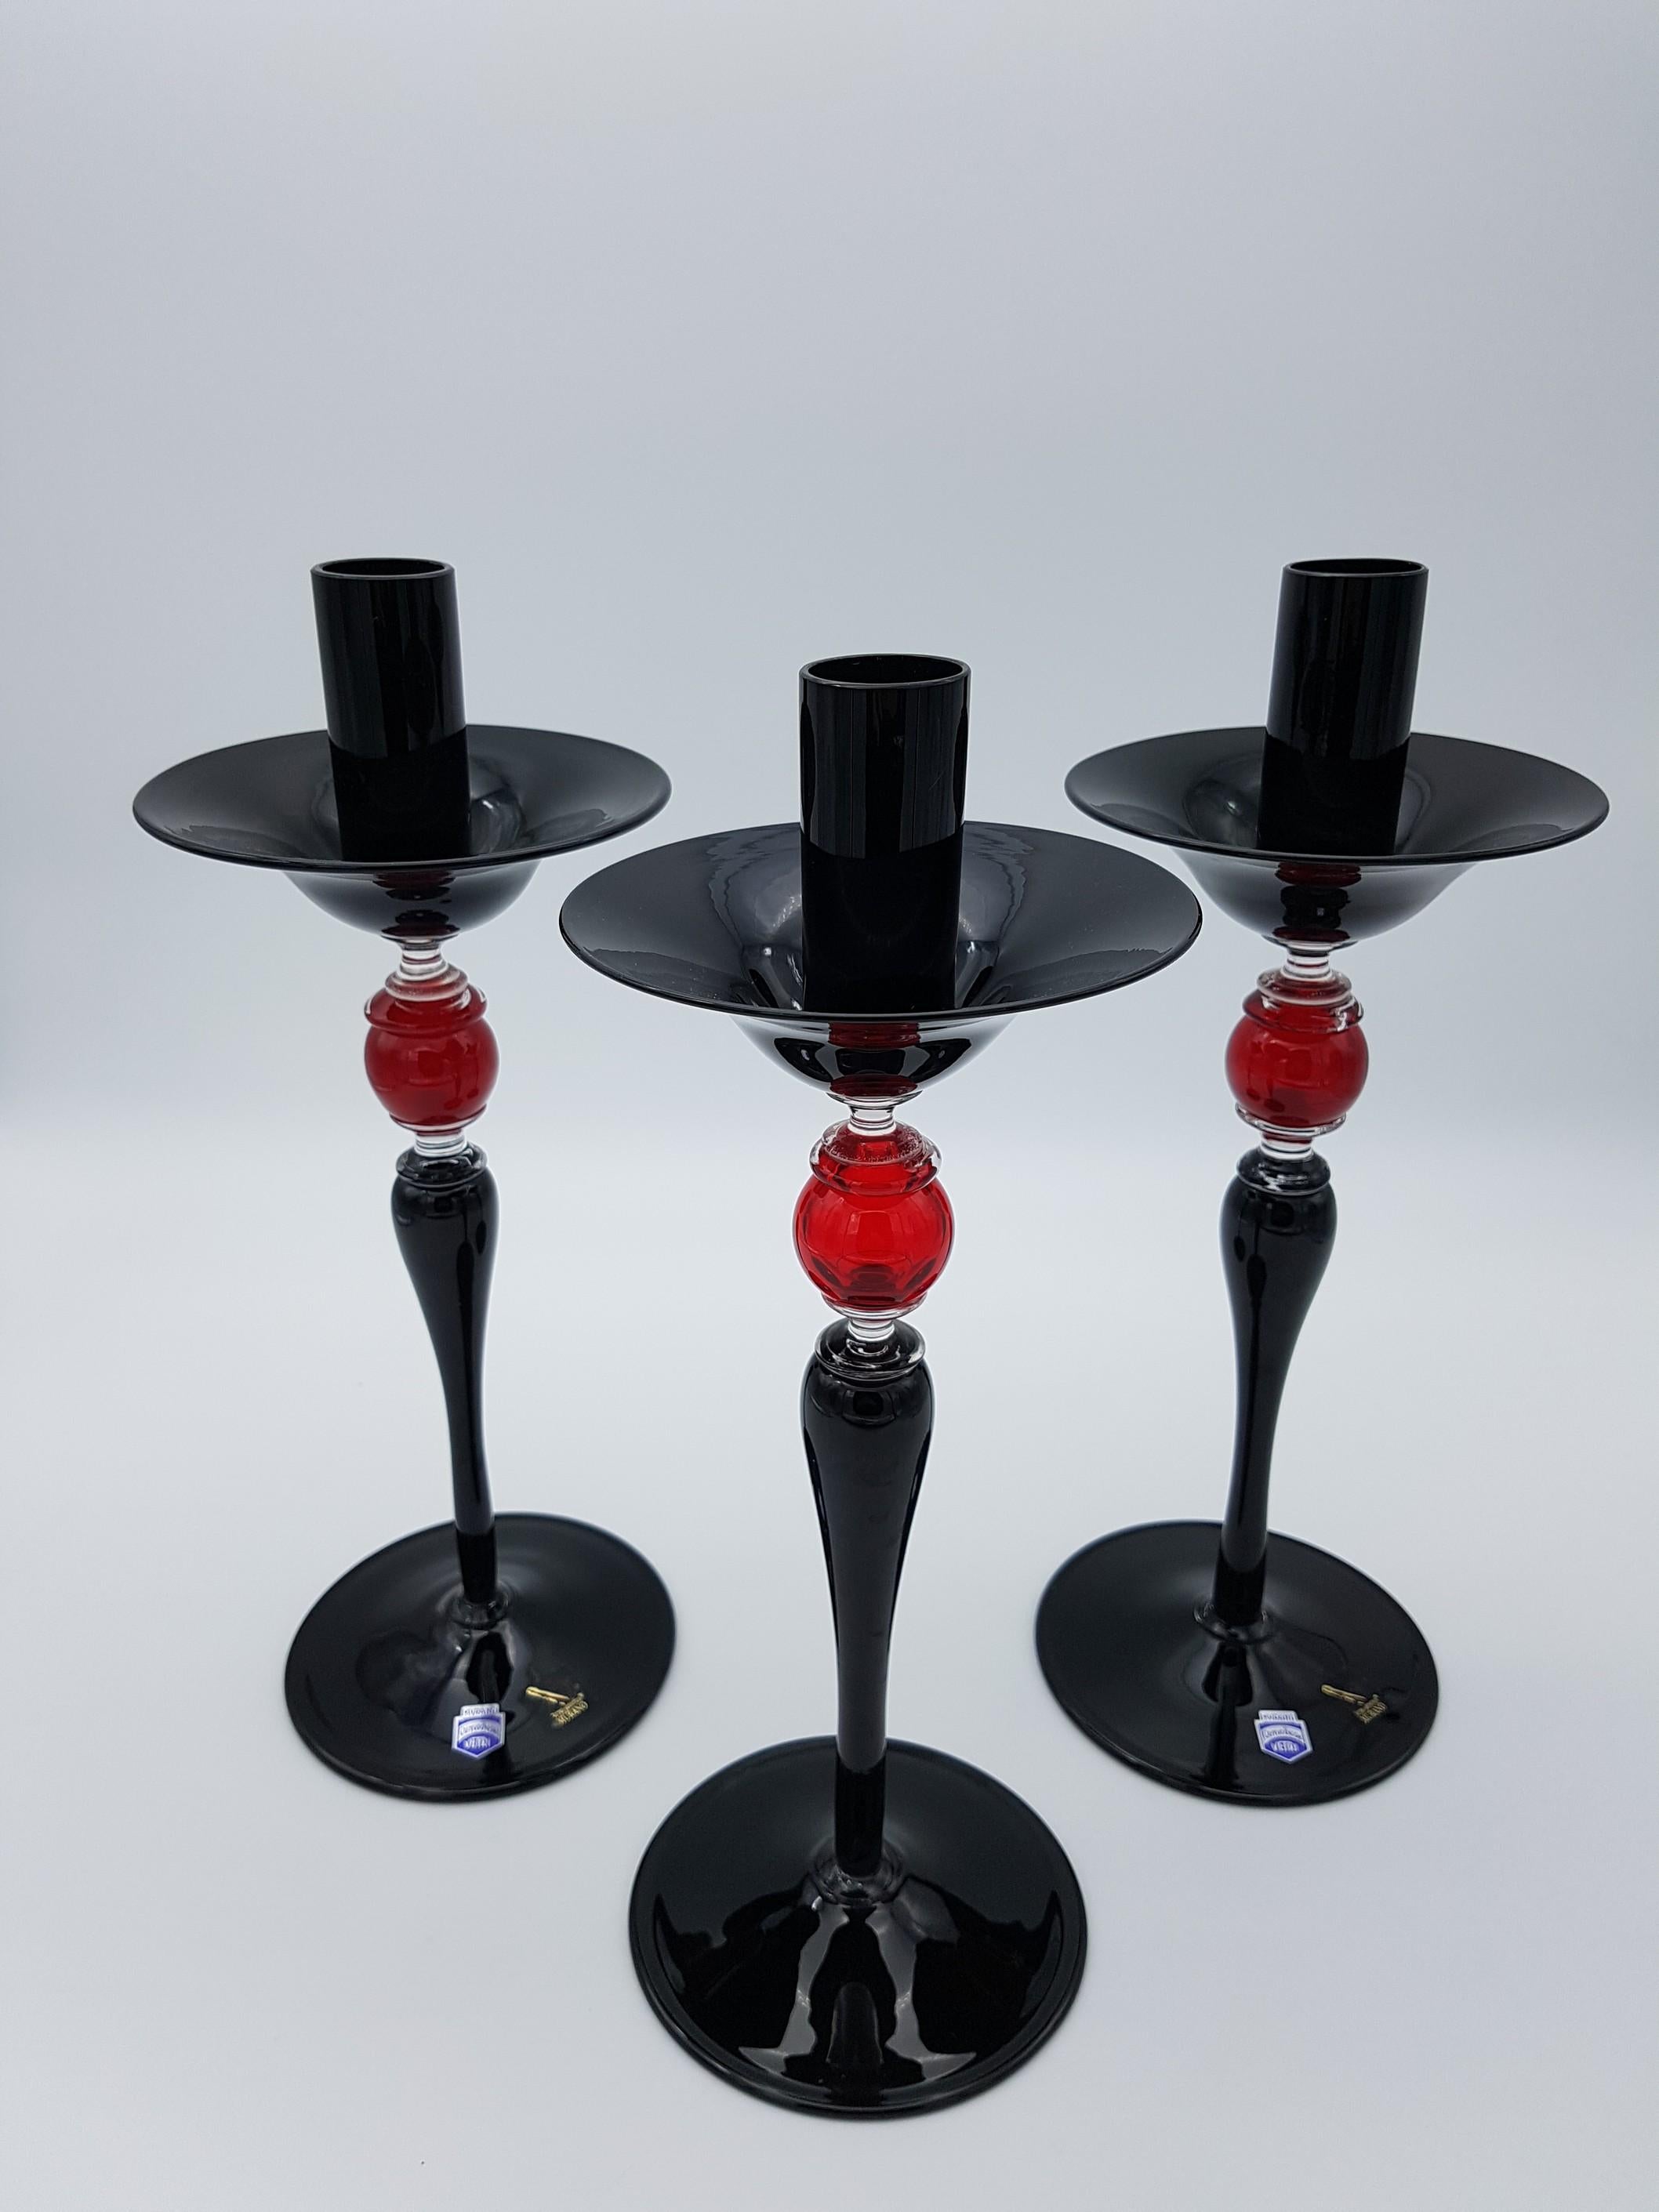 This impressive set of three Murano glass candlesticks retain all the flavor of Classic Venetian home decor but with the added bonus of vibrant modern colors. The candlesticks have been mouth-blown and handmade by Gino Cenedese e Filgio in the early